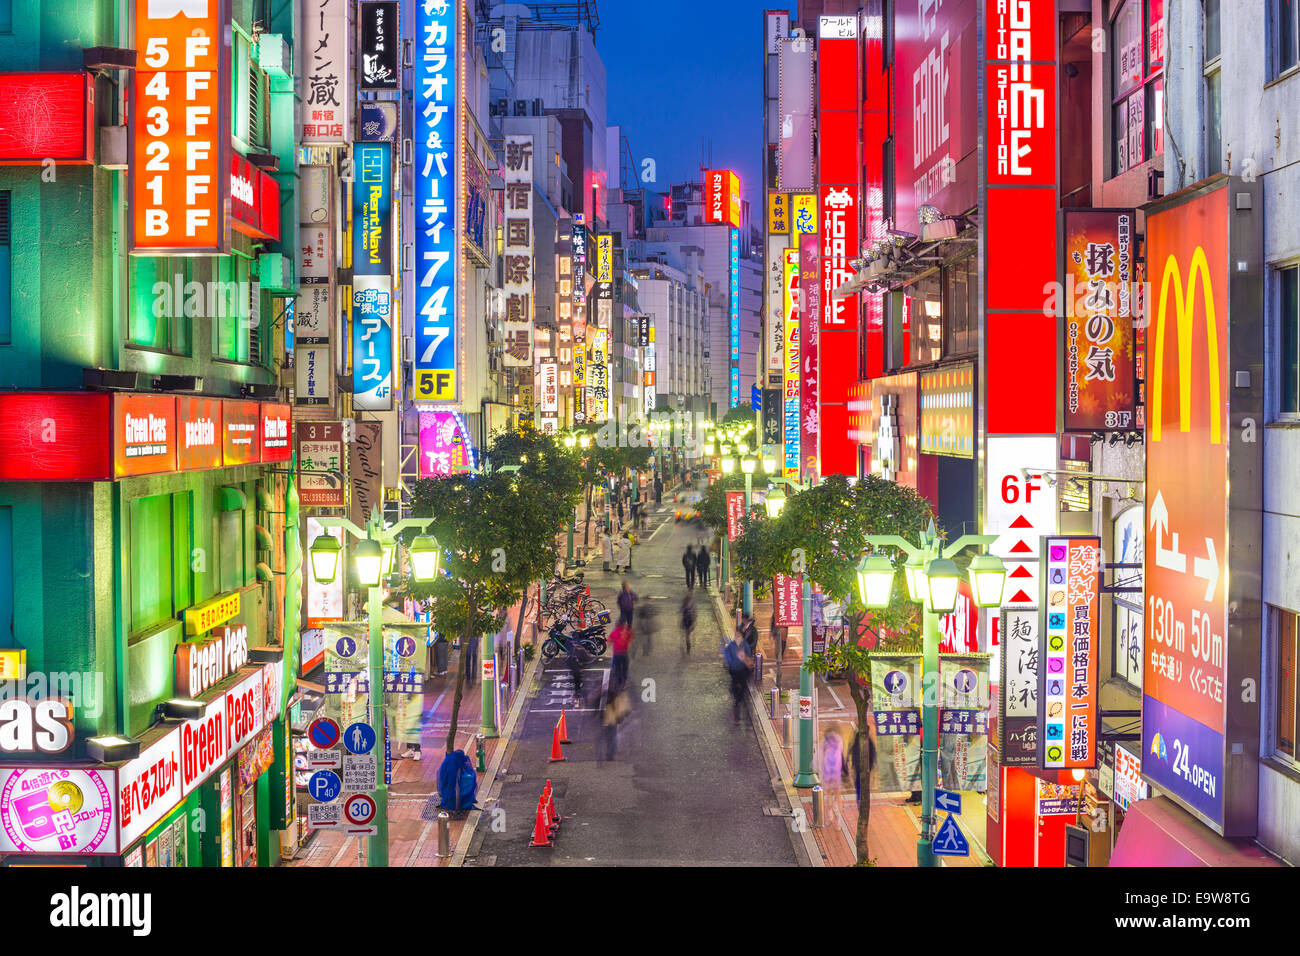 TOKYO, JAPAN - DECEMBER 17, 2012: Nightlife in theShinjuku District. The area is a famed nightlife and red-light district. Stock Photo